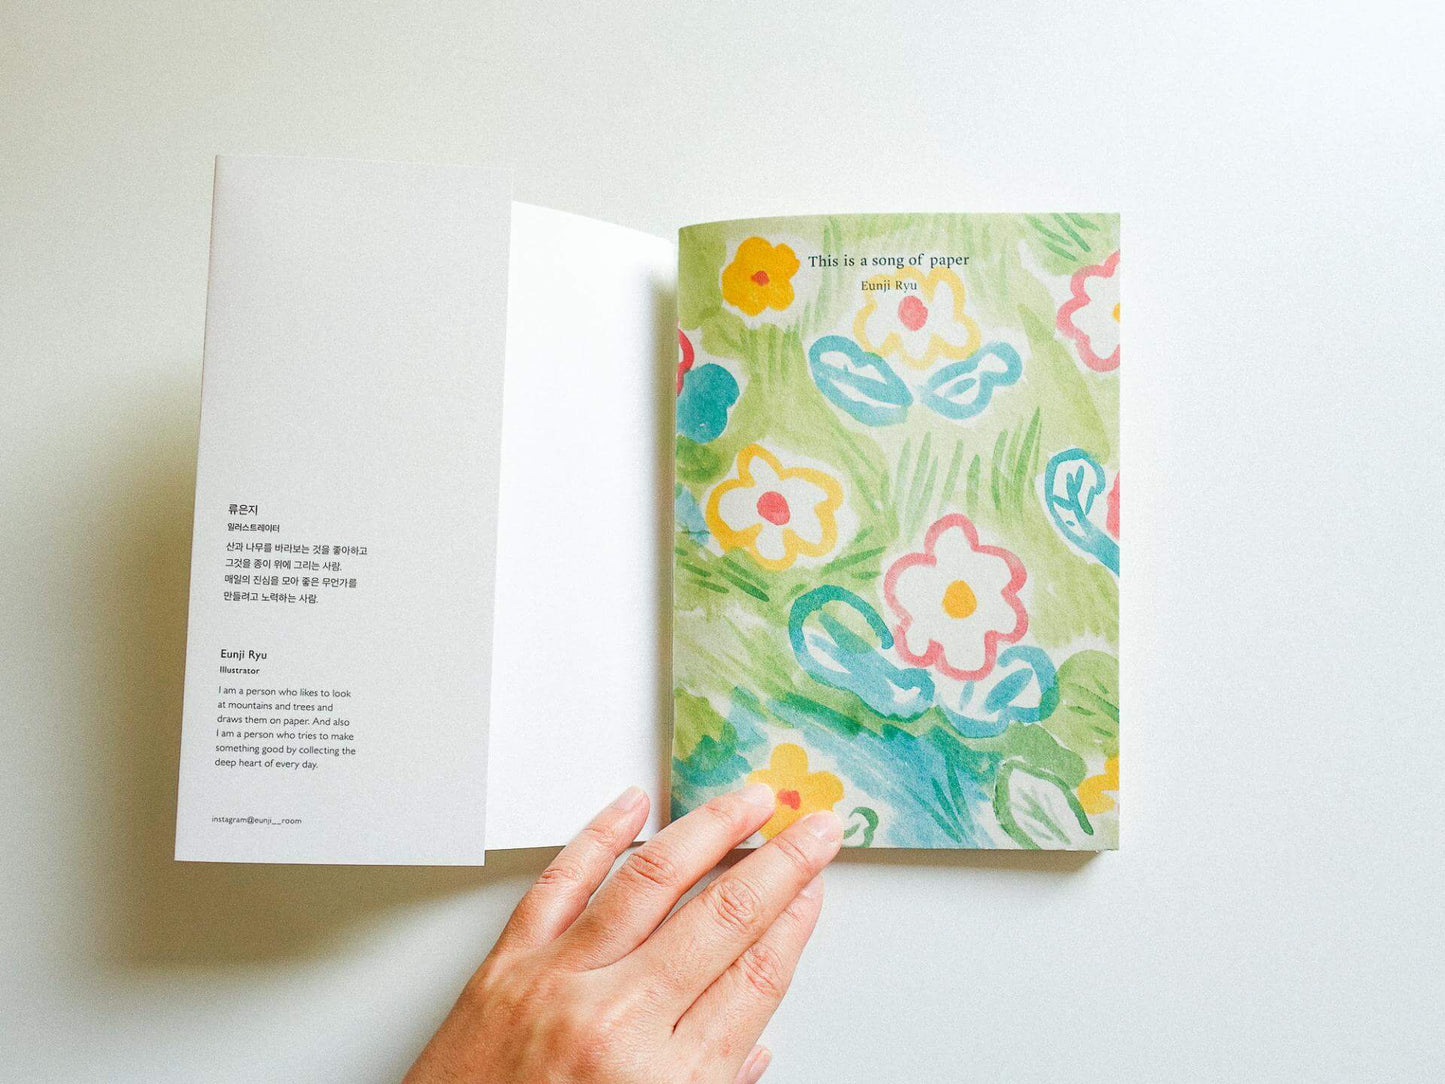 “This is a song of paper” Art Book